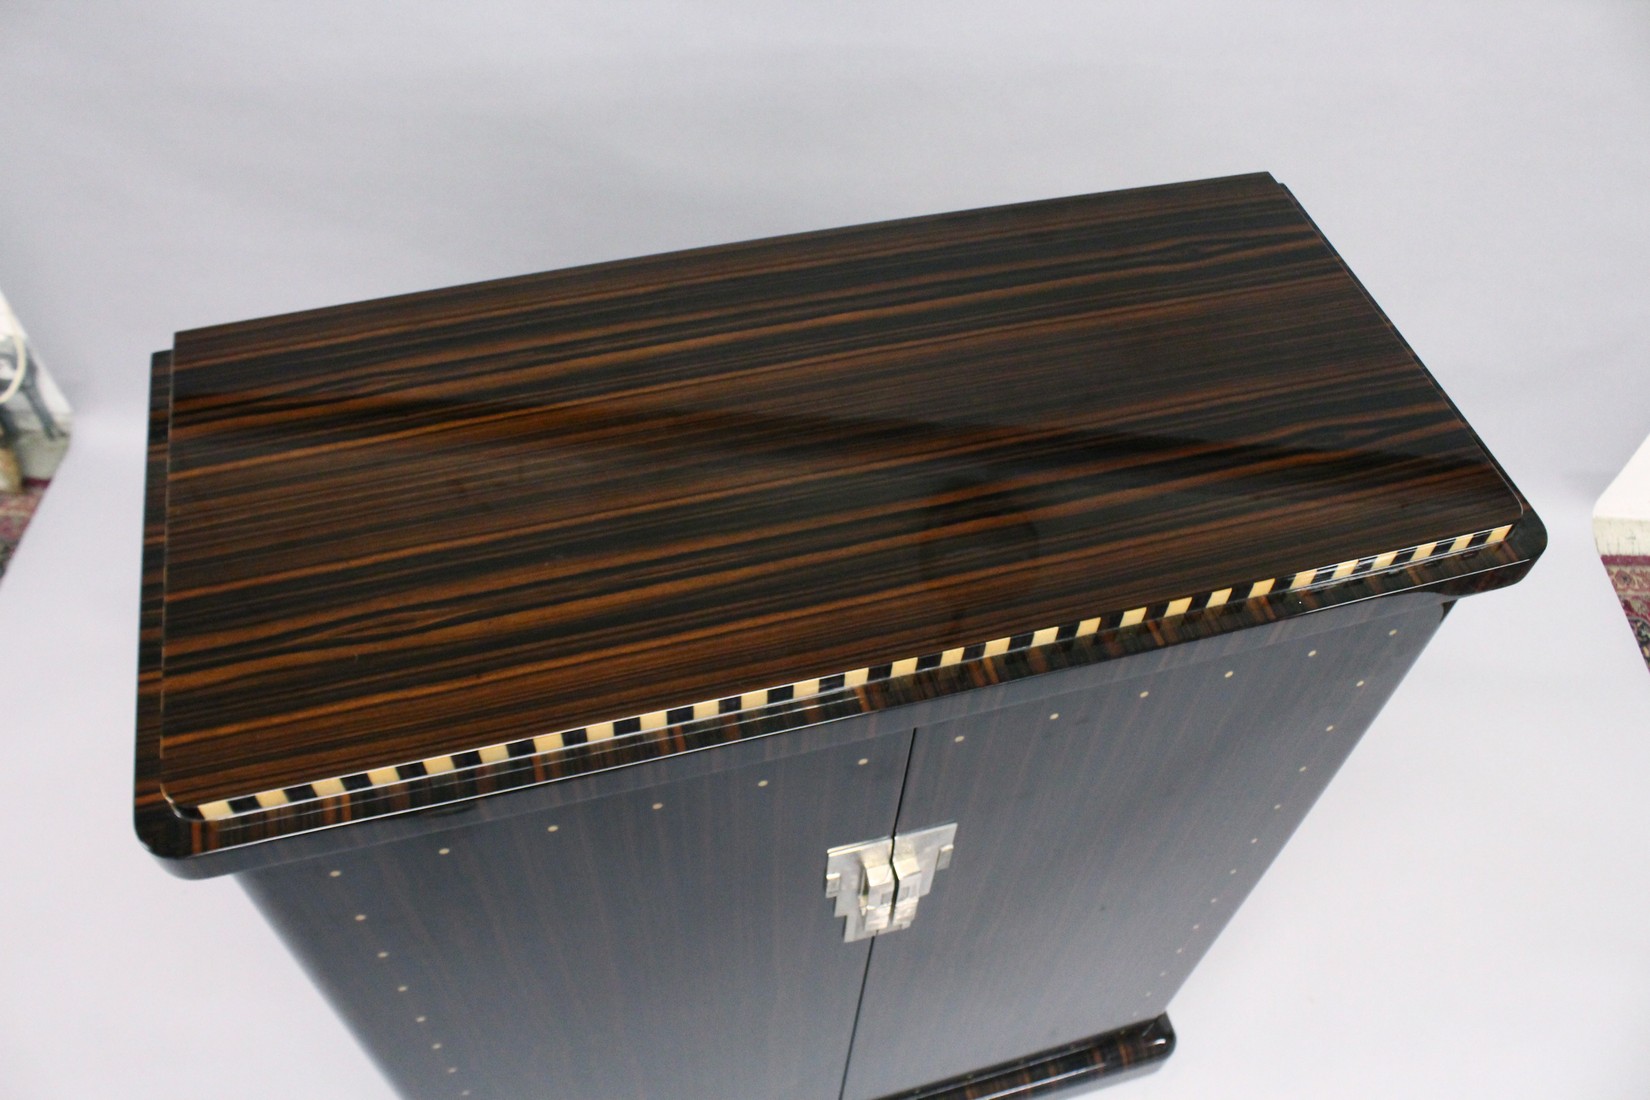 DAVID PATRICK GAGUECH (French Furniture Designer) A TWO-DOOR CABINET WITH A MACASSOR EBONY VENEER - Image 4 of 8